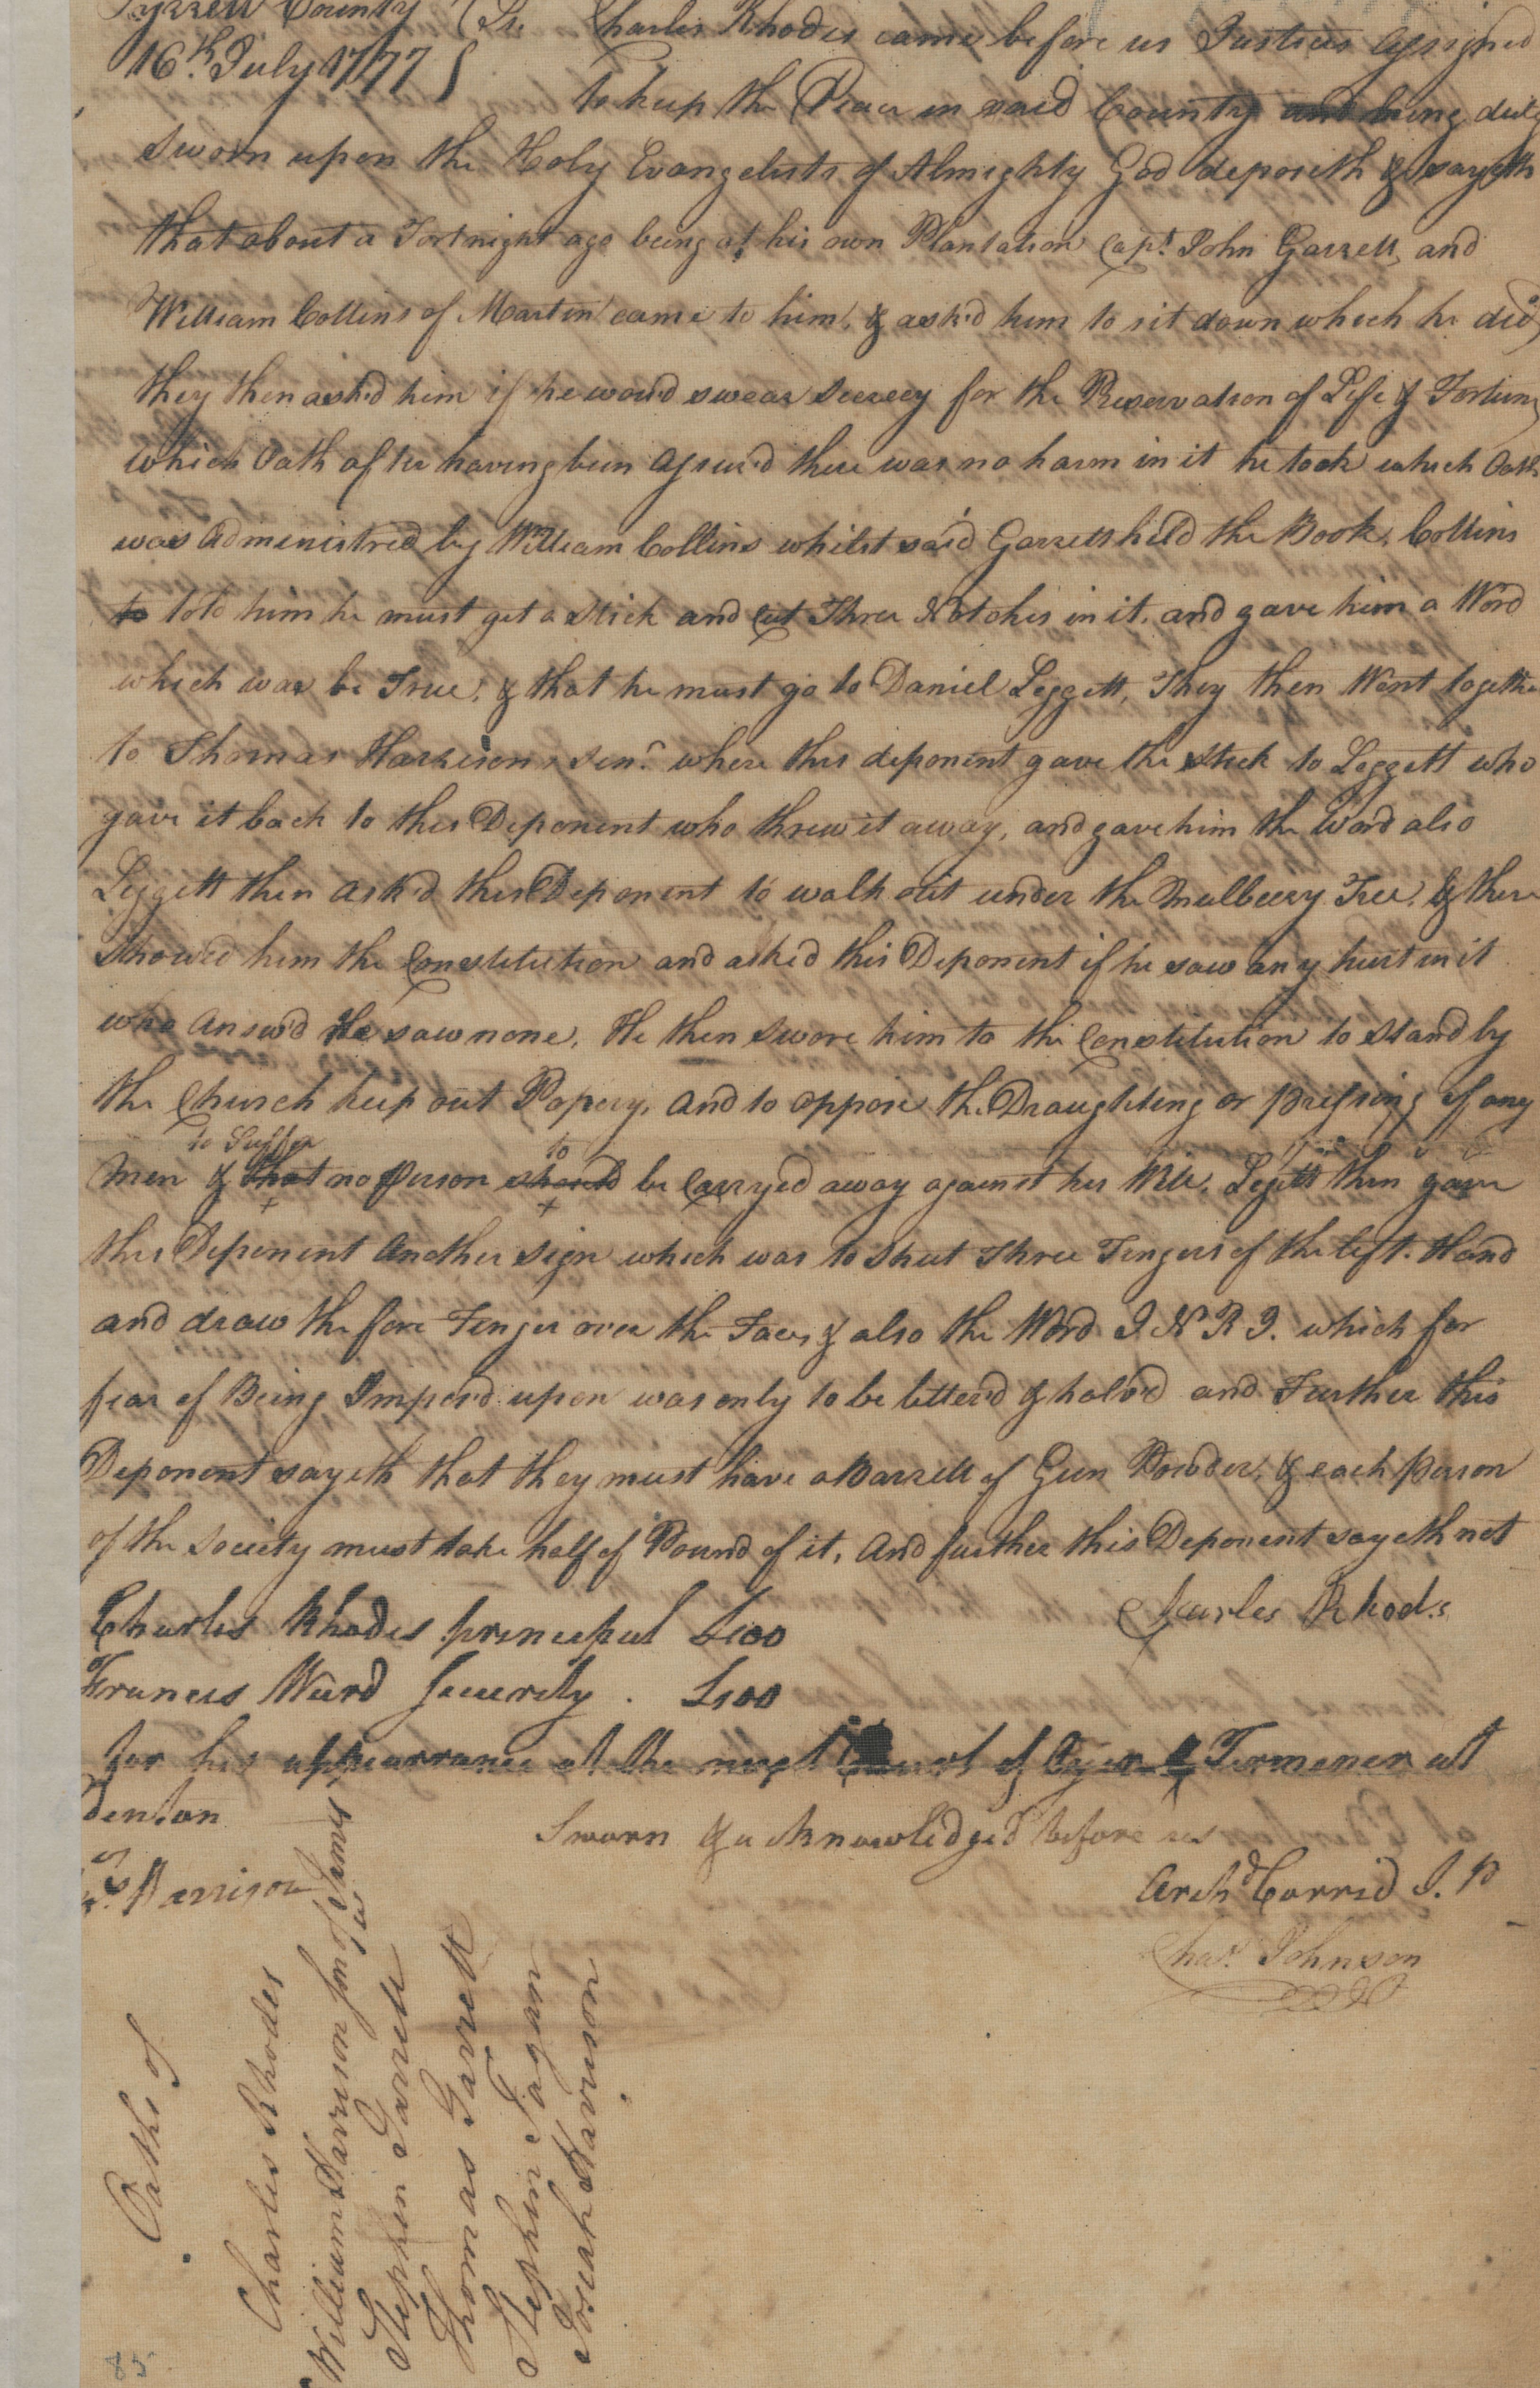 Deposition of Charles Rhodes, 16 July 1777